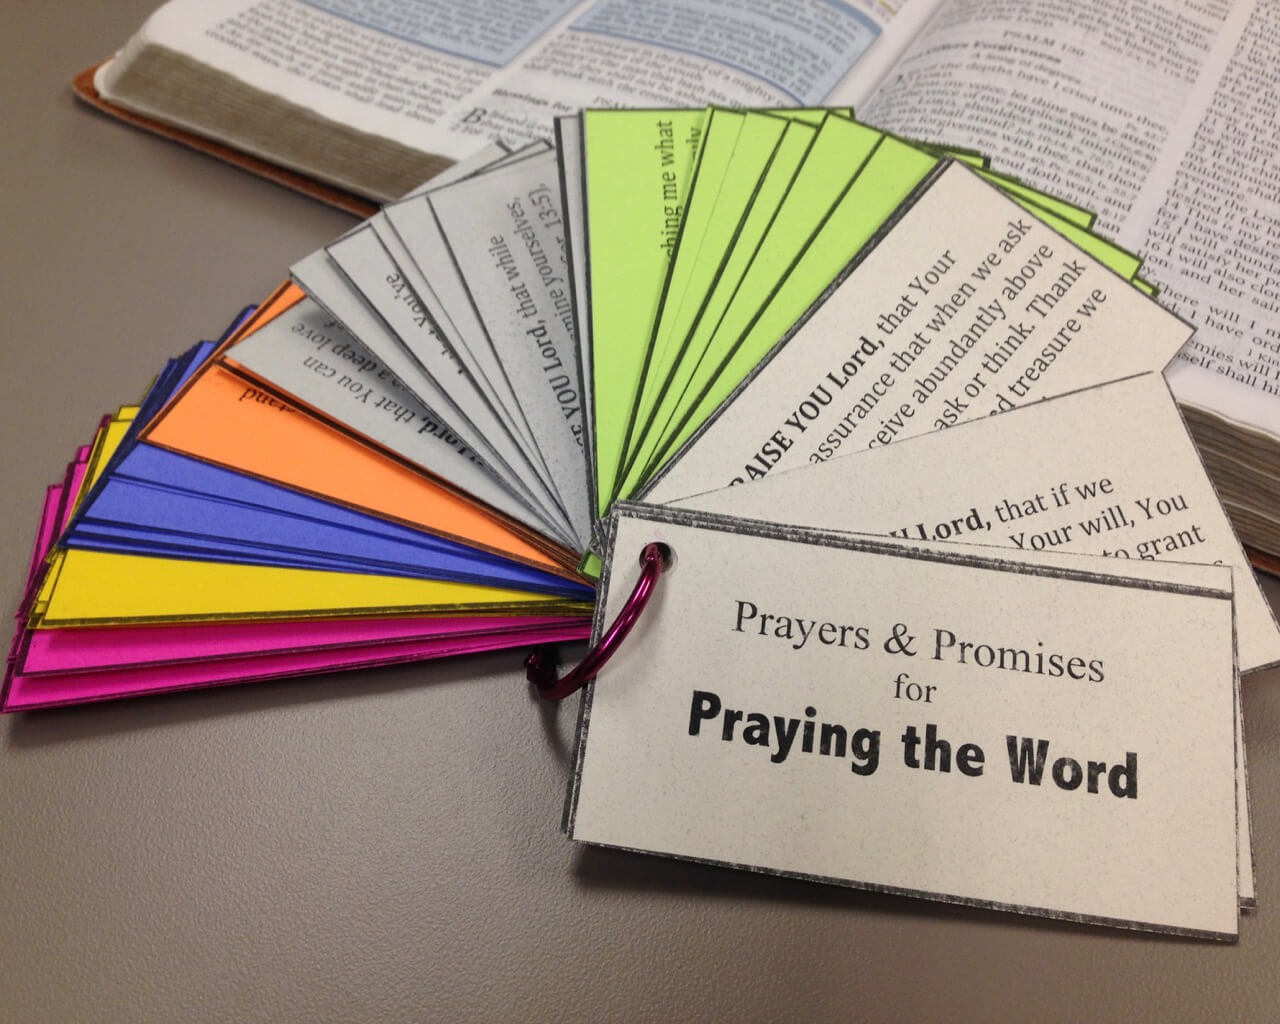 Praying The Word: Prayer & Promise Cards | Revival & Reformation Pertaining To Prayer Card Template For Word